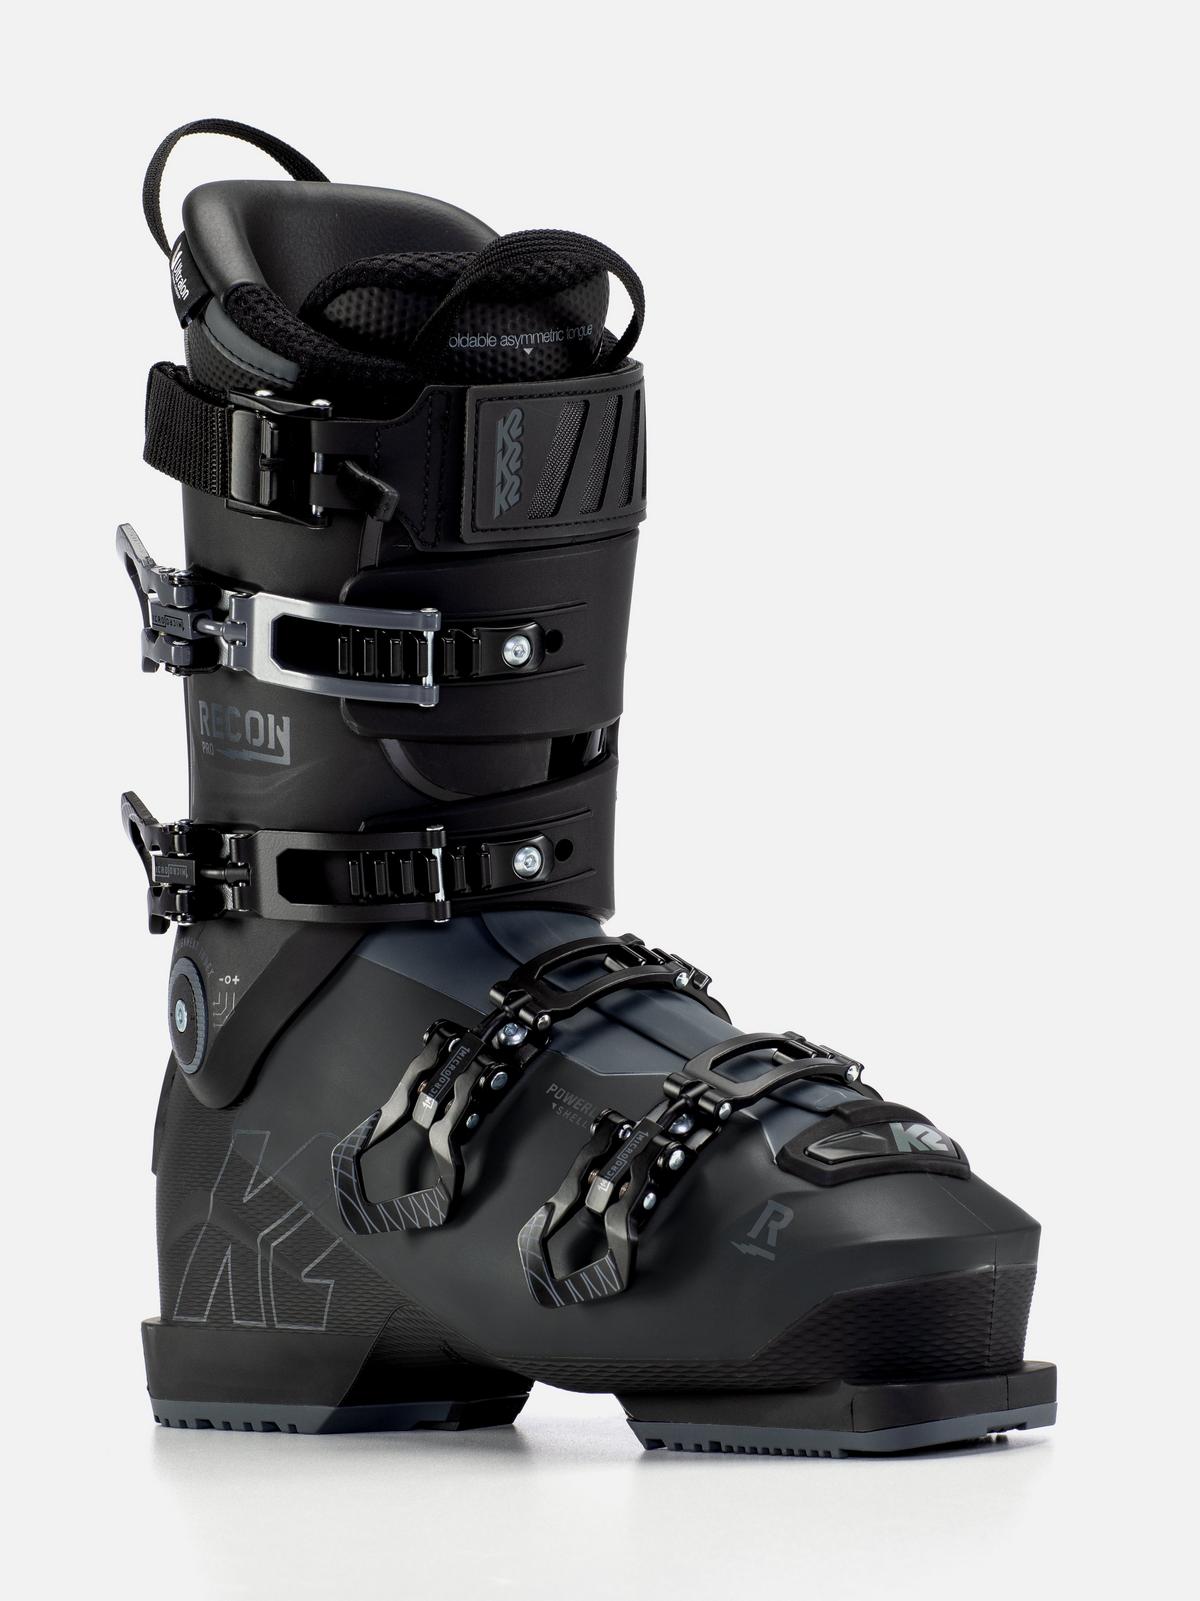 K2 Recon Pro Ski Boots 2022 | K2 Skis and K2 Snowboarding